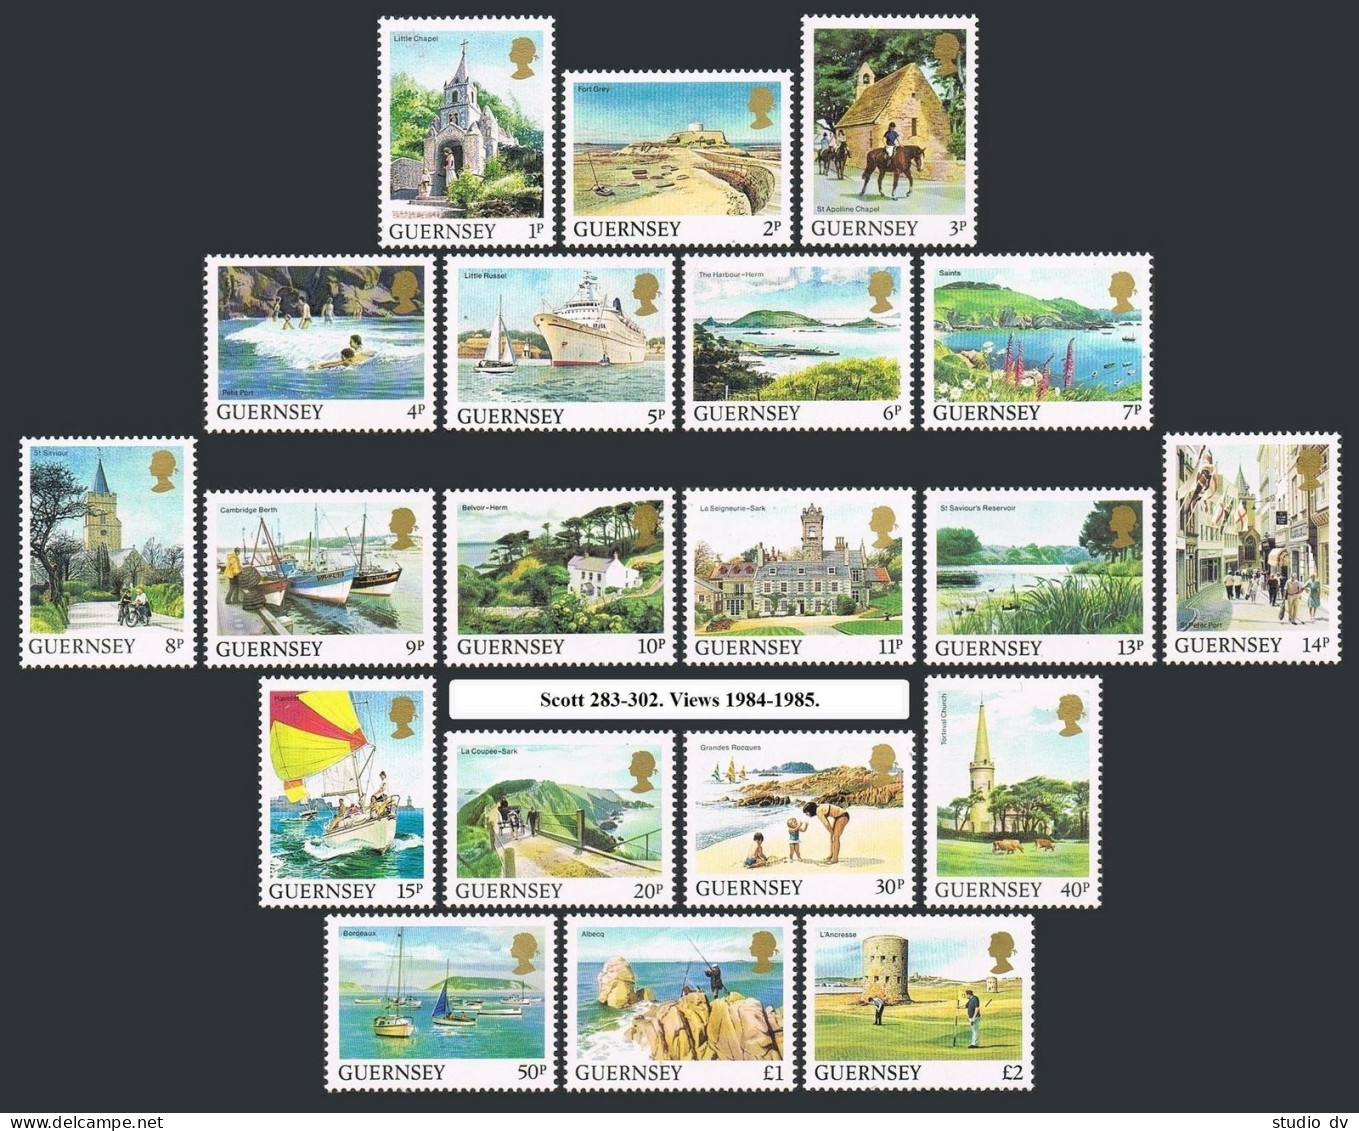 Guernsey 283-302,MNH.Michel 288-297,325-334. Views 1984-1985.Yachts,Castles. - Guernesey